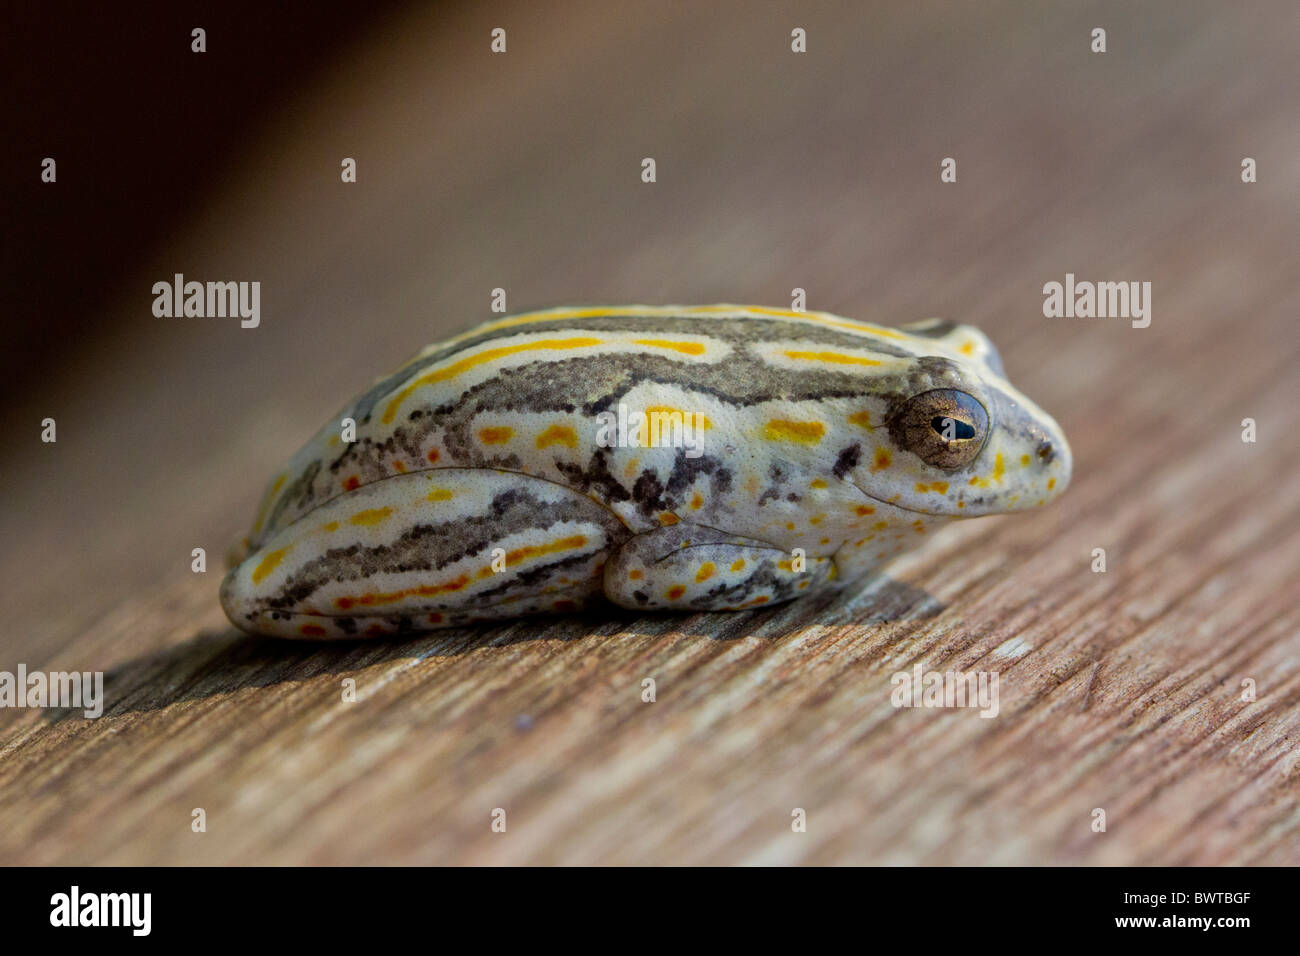 Portrait of a reed frog (Hyperolius argus) in the bush. The photo was taken in Kruger National Park, South Africa. Stock Photo